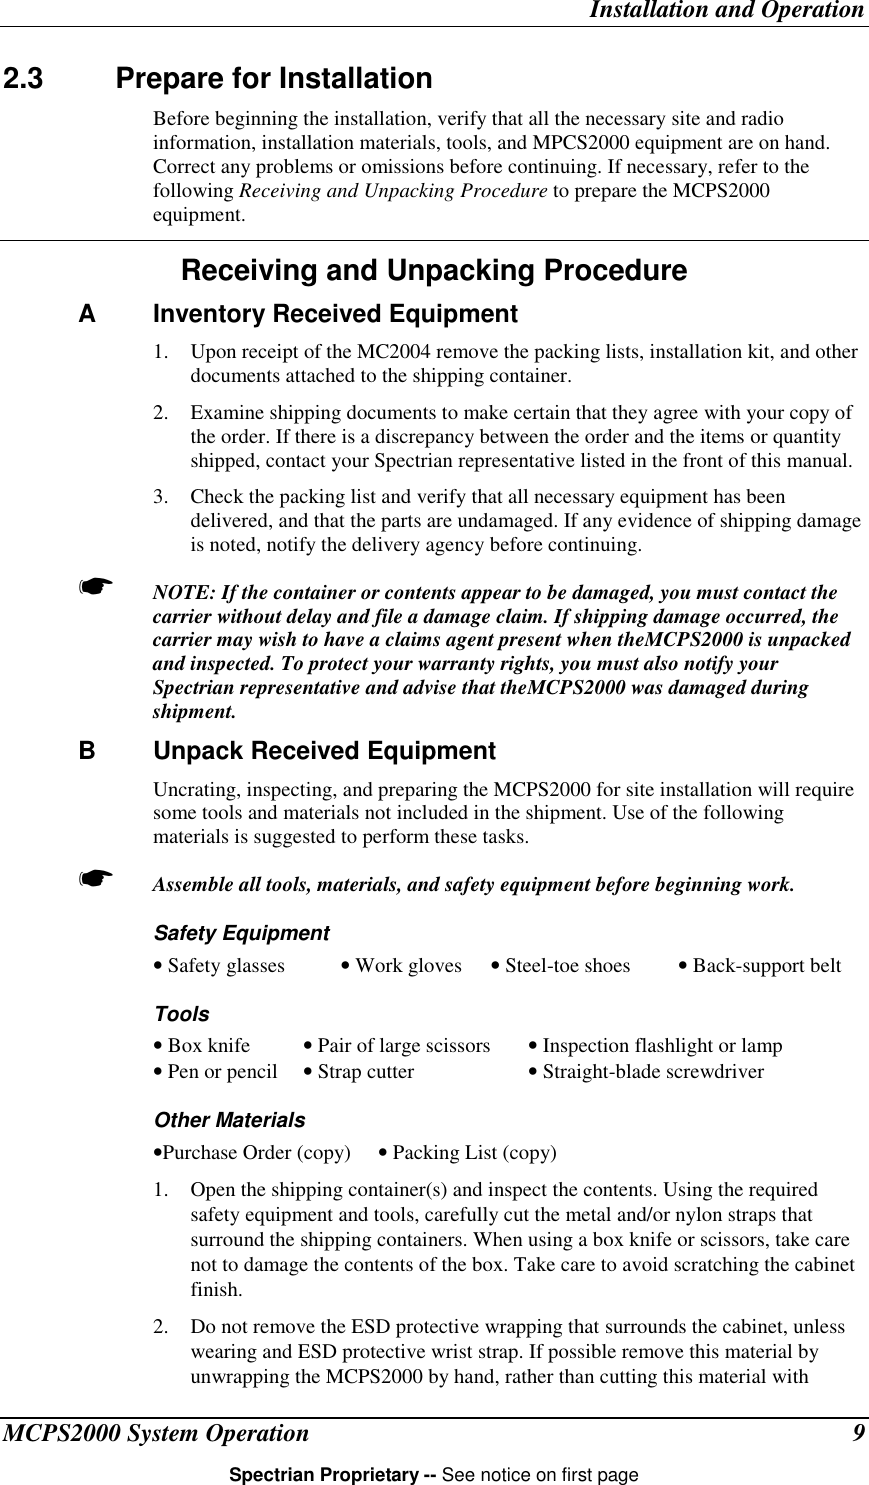 Installation and OperationMCPS2000 System Operation 9Spectrian Proprietary -- See notice on first page2.3 Prepare for InstallationBefore beginning the installation, verify that all the necessary site and radioinformation, installation materials, tools, and MPCS2000 equipment are on hand.Correct any problems or omissions before continuing. If necessary, refer to thefollowing Receiving and Unpacking Procedure to prepare the MCPS2000equipment.Receiving and Unpacking ProcedureA Inventory Received Equipment1. Upon receipt of the MC2004 remove the packing lists, installation kit, and otherdocuments attached to the shipping container.2. Examine shipping documents to make certain that they agree with your copy ofthe order. If there is a discrepancy between the order and the items or quantityshipped, contact your Spectrian representative listed in the front of this manual.3. Check the packing list and verify that all necessary equipment has beendelivered, and that the parts are undamaged. If any evidence of shipping damageis noted, notify the delivery agency before continuing.☛ NOTE: If the container or contents appear to be damaged, you must contact thecarrier without delay and file a damage claim. If shipping damage occurred, thecarrier may wish to have a claims agent present when theMCPS2000 is unpackedand inspected. To protect your warranty rights, you must also notify yourSpectrian representative and advise that theMCPS2000 was damaged duringshipment.B Unpack Received EquipmentUncrating, inspecting, and preparing the MCPS2000 for site installation will requiresome tools and materials not included in the shipment. Use of the followingmaterials is suggested to perform these tasks.☛ Assemble all tools, materials, and safety equipment before beginning work.Safety Equipment• Safety glasses • Work gloves • Steel-toe shoes • Back-support beltTools• Box knife • Pair of large scissors • Inspection flashlight or lamp• Pen or pencil • Strap cutter  • Straight-blade screwdriverOther Materials•Purchase Order (copy) • Packing List (copy)1. Open the shipping container(s) and inspect the contents. Using the requiredsafety equipment and tools, carefully cut the metal and/or nylon straps thatsurround the shipping containers. When using a box knife or scissors, take carenot to damage the contents of the box. Take care to avoid scratching the cabinetfinish.2. Do not remove the ESD protective wrapping that surrounds the cabinet, unlesswearing and ESD protective wrist strap. If possible remove this material byunwrapping the MCPS2000 by hand, rather than cutting this material with